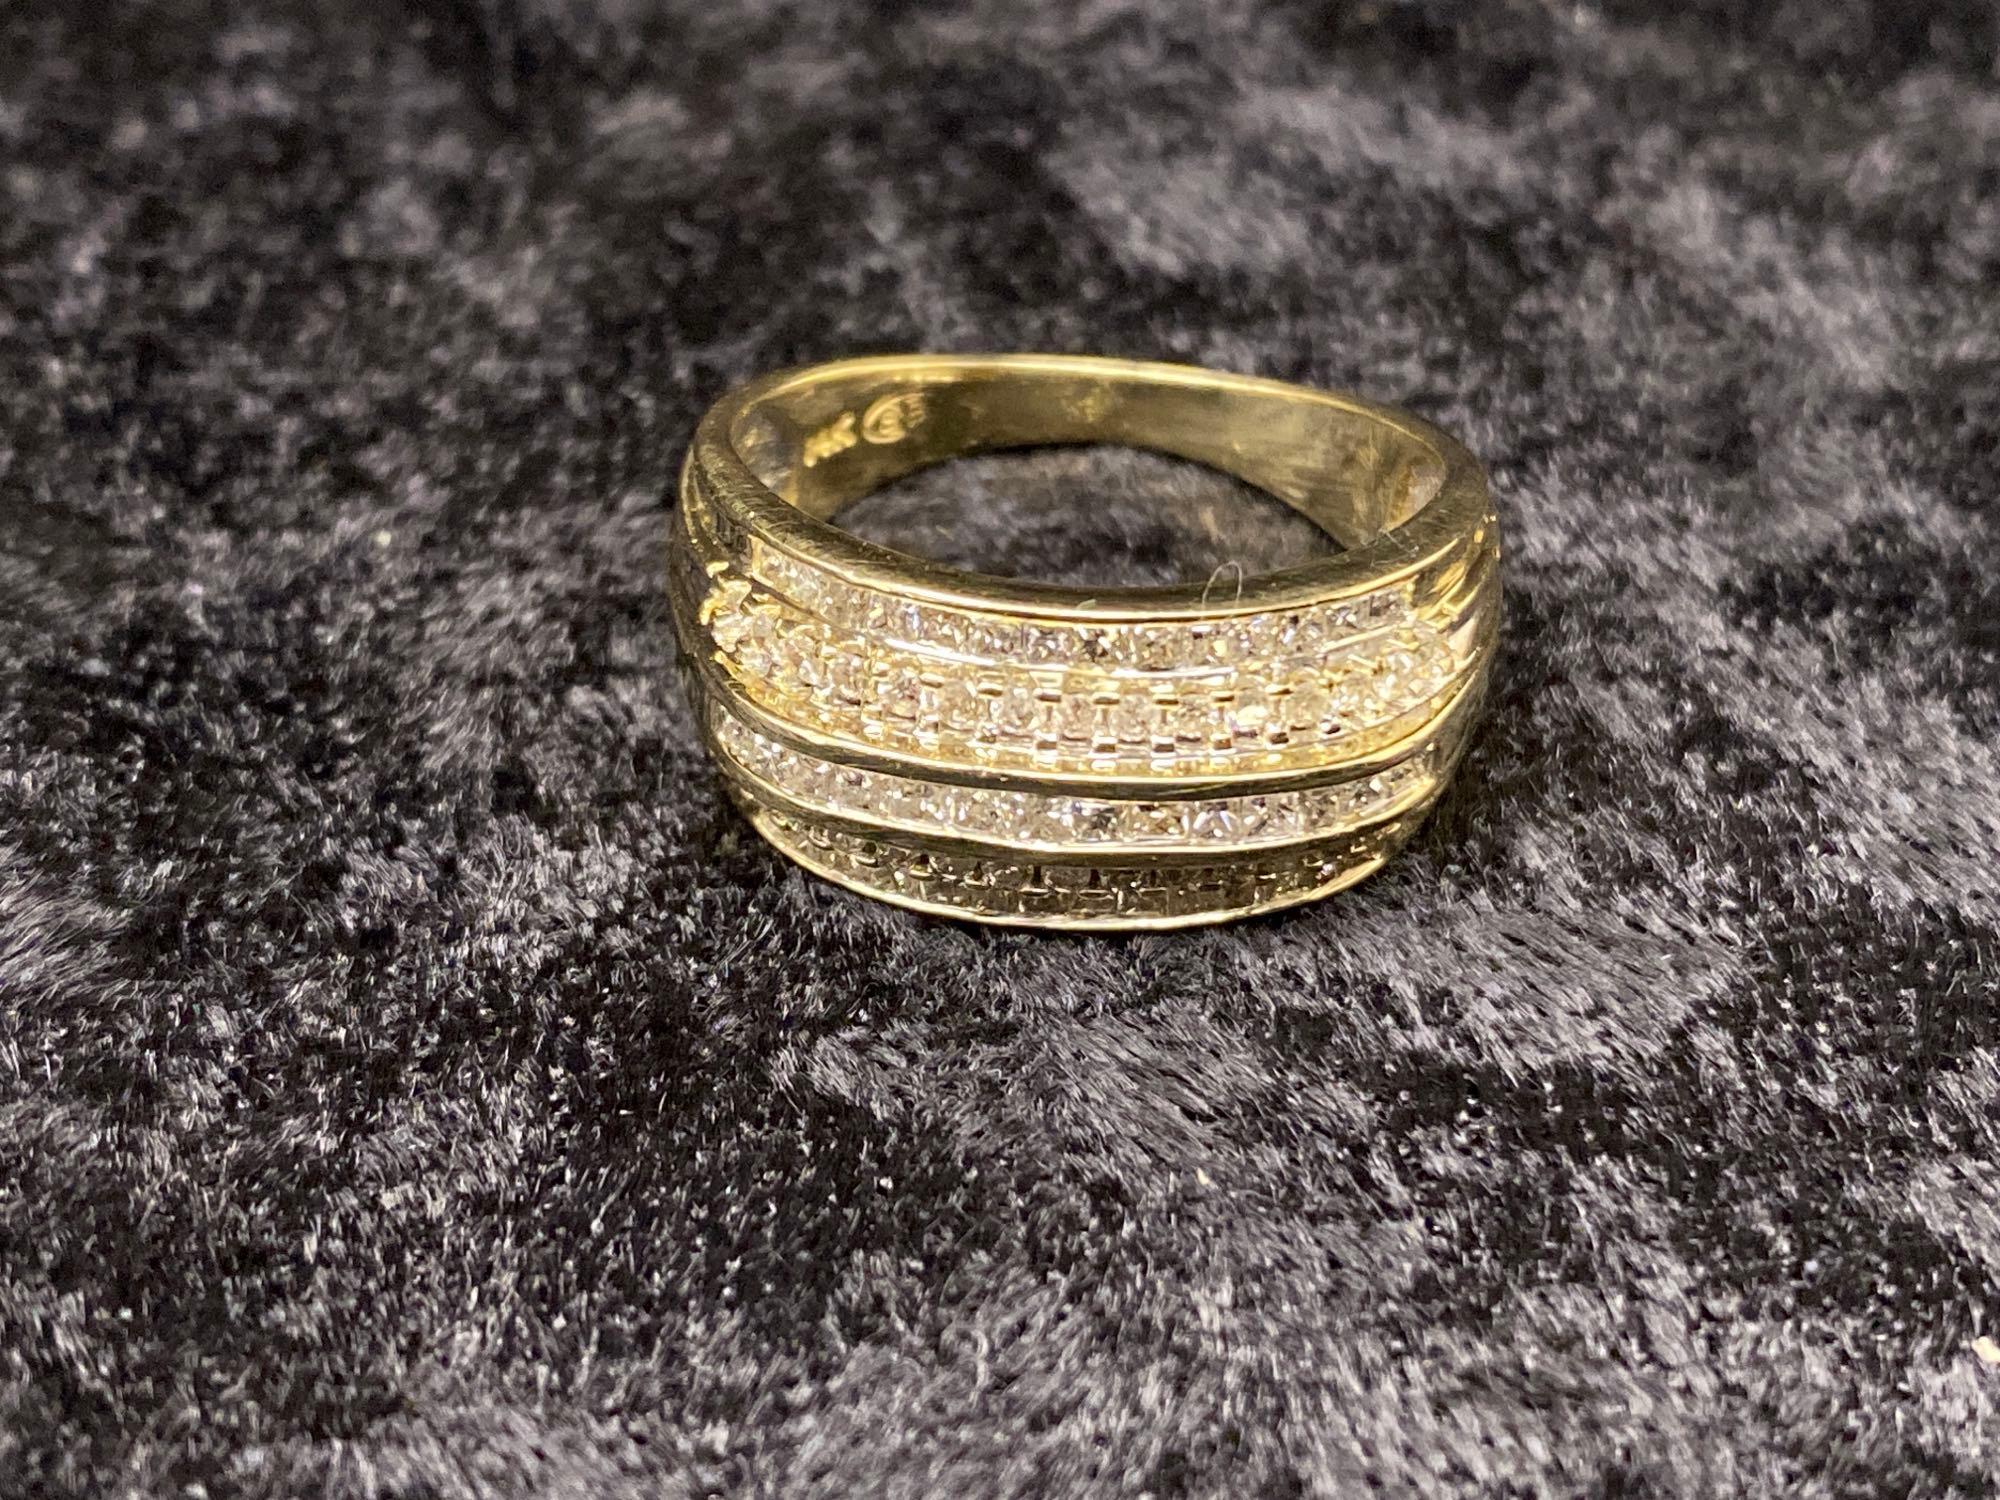 One 14k Yellow Gold Ring with Diamond Band Rows